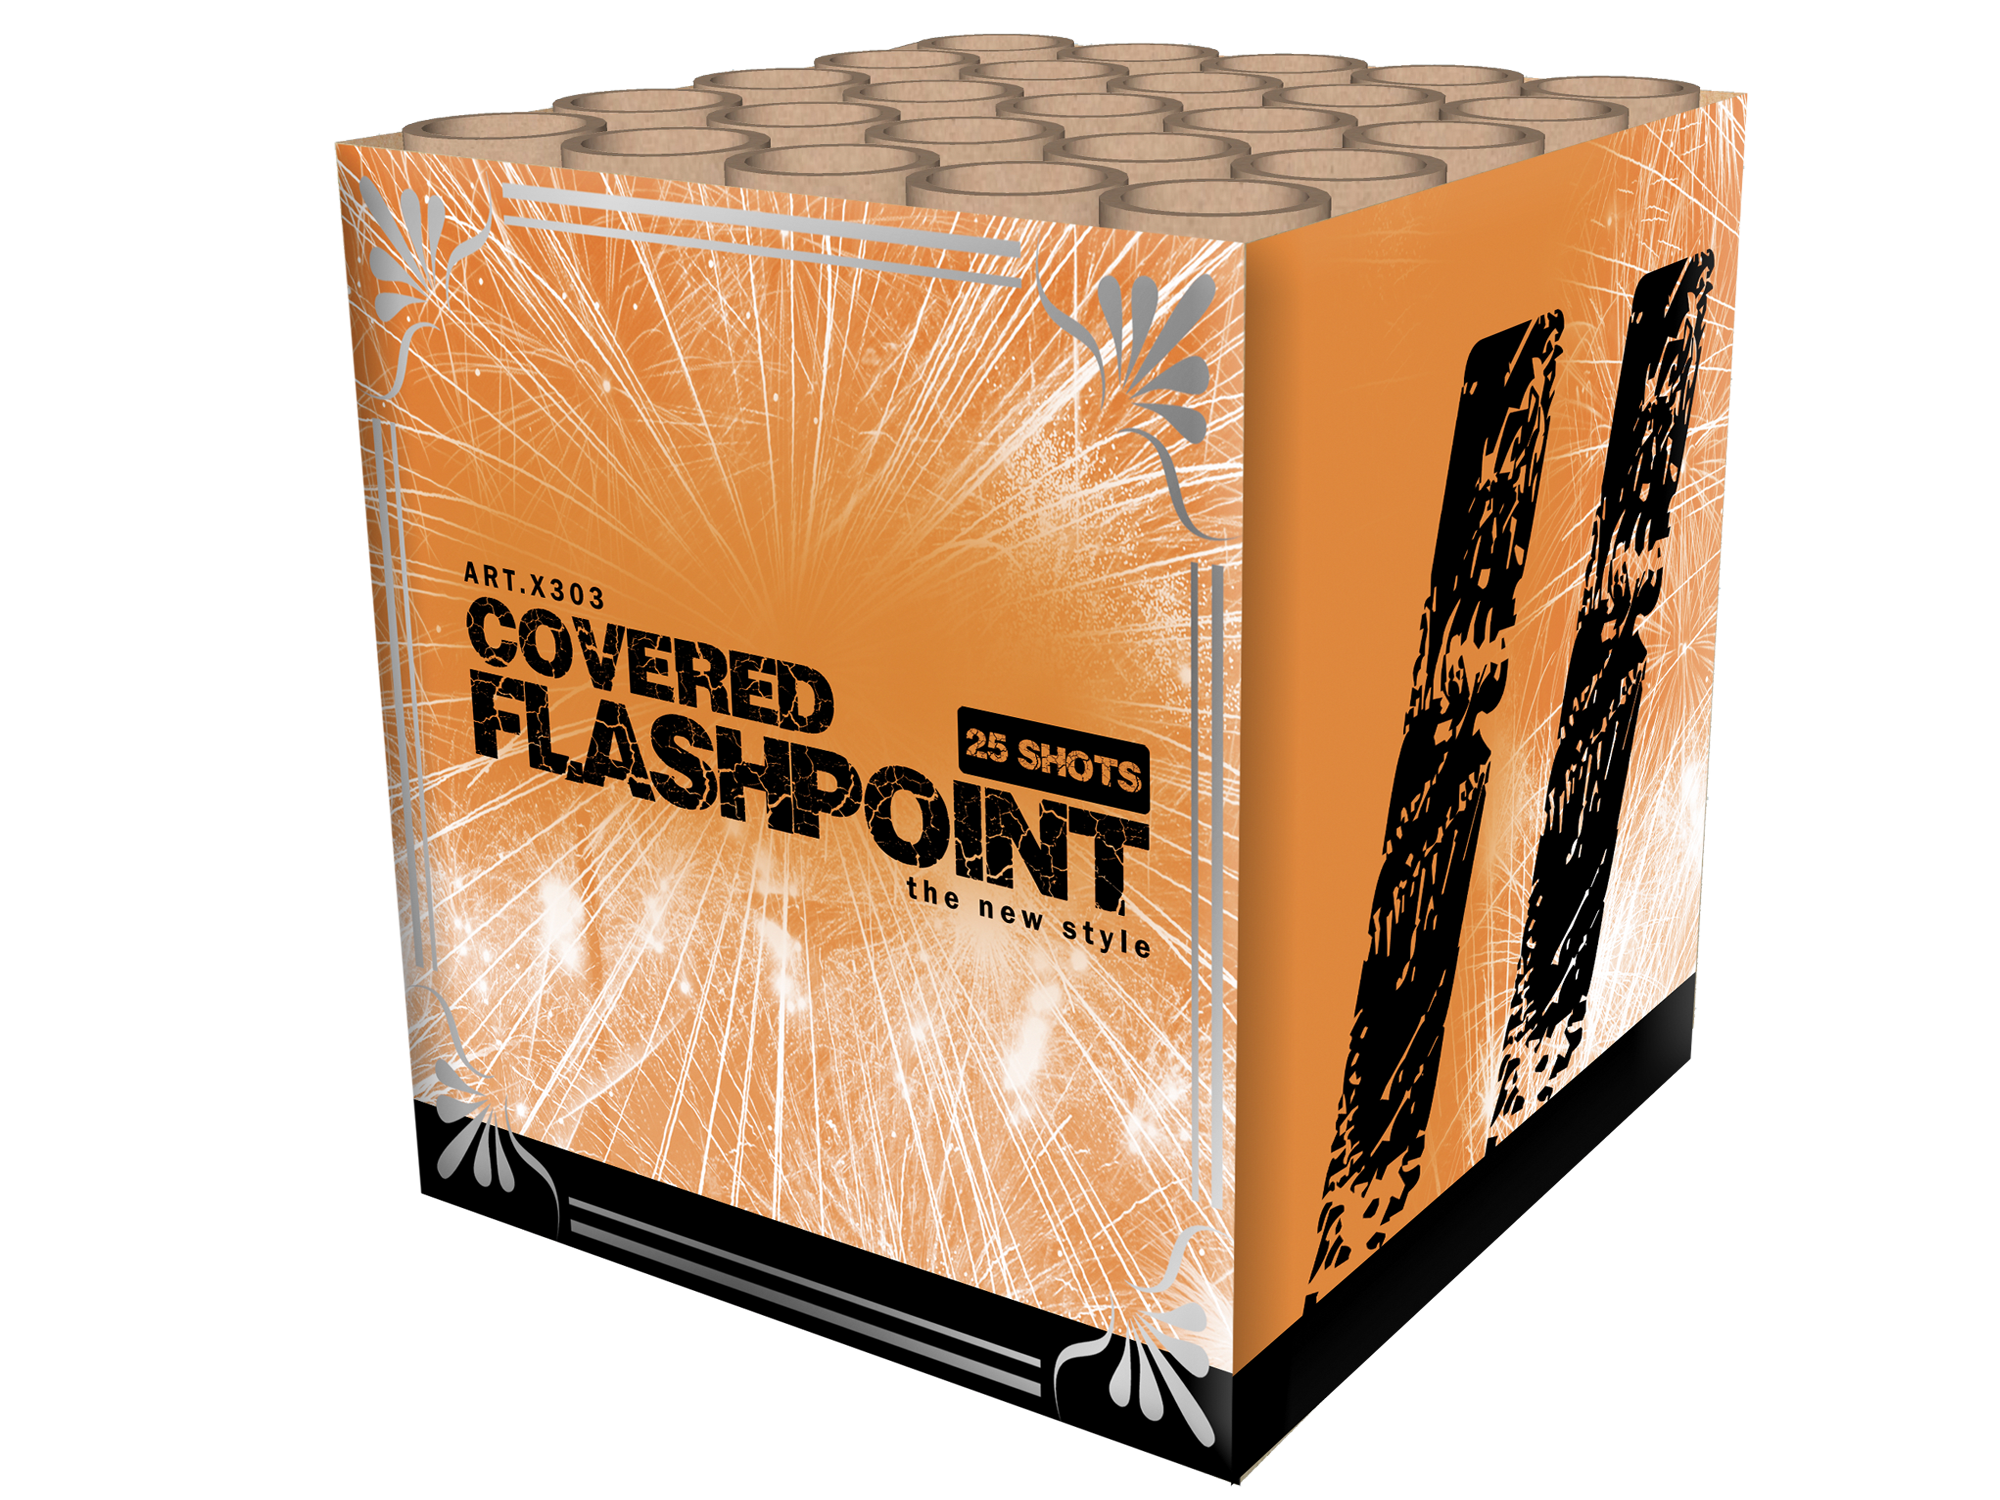 Covered Flashpoint